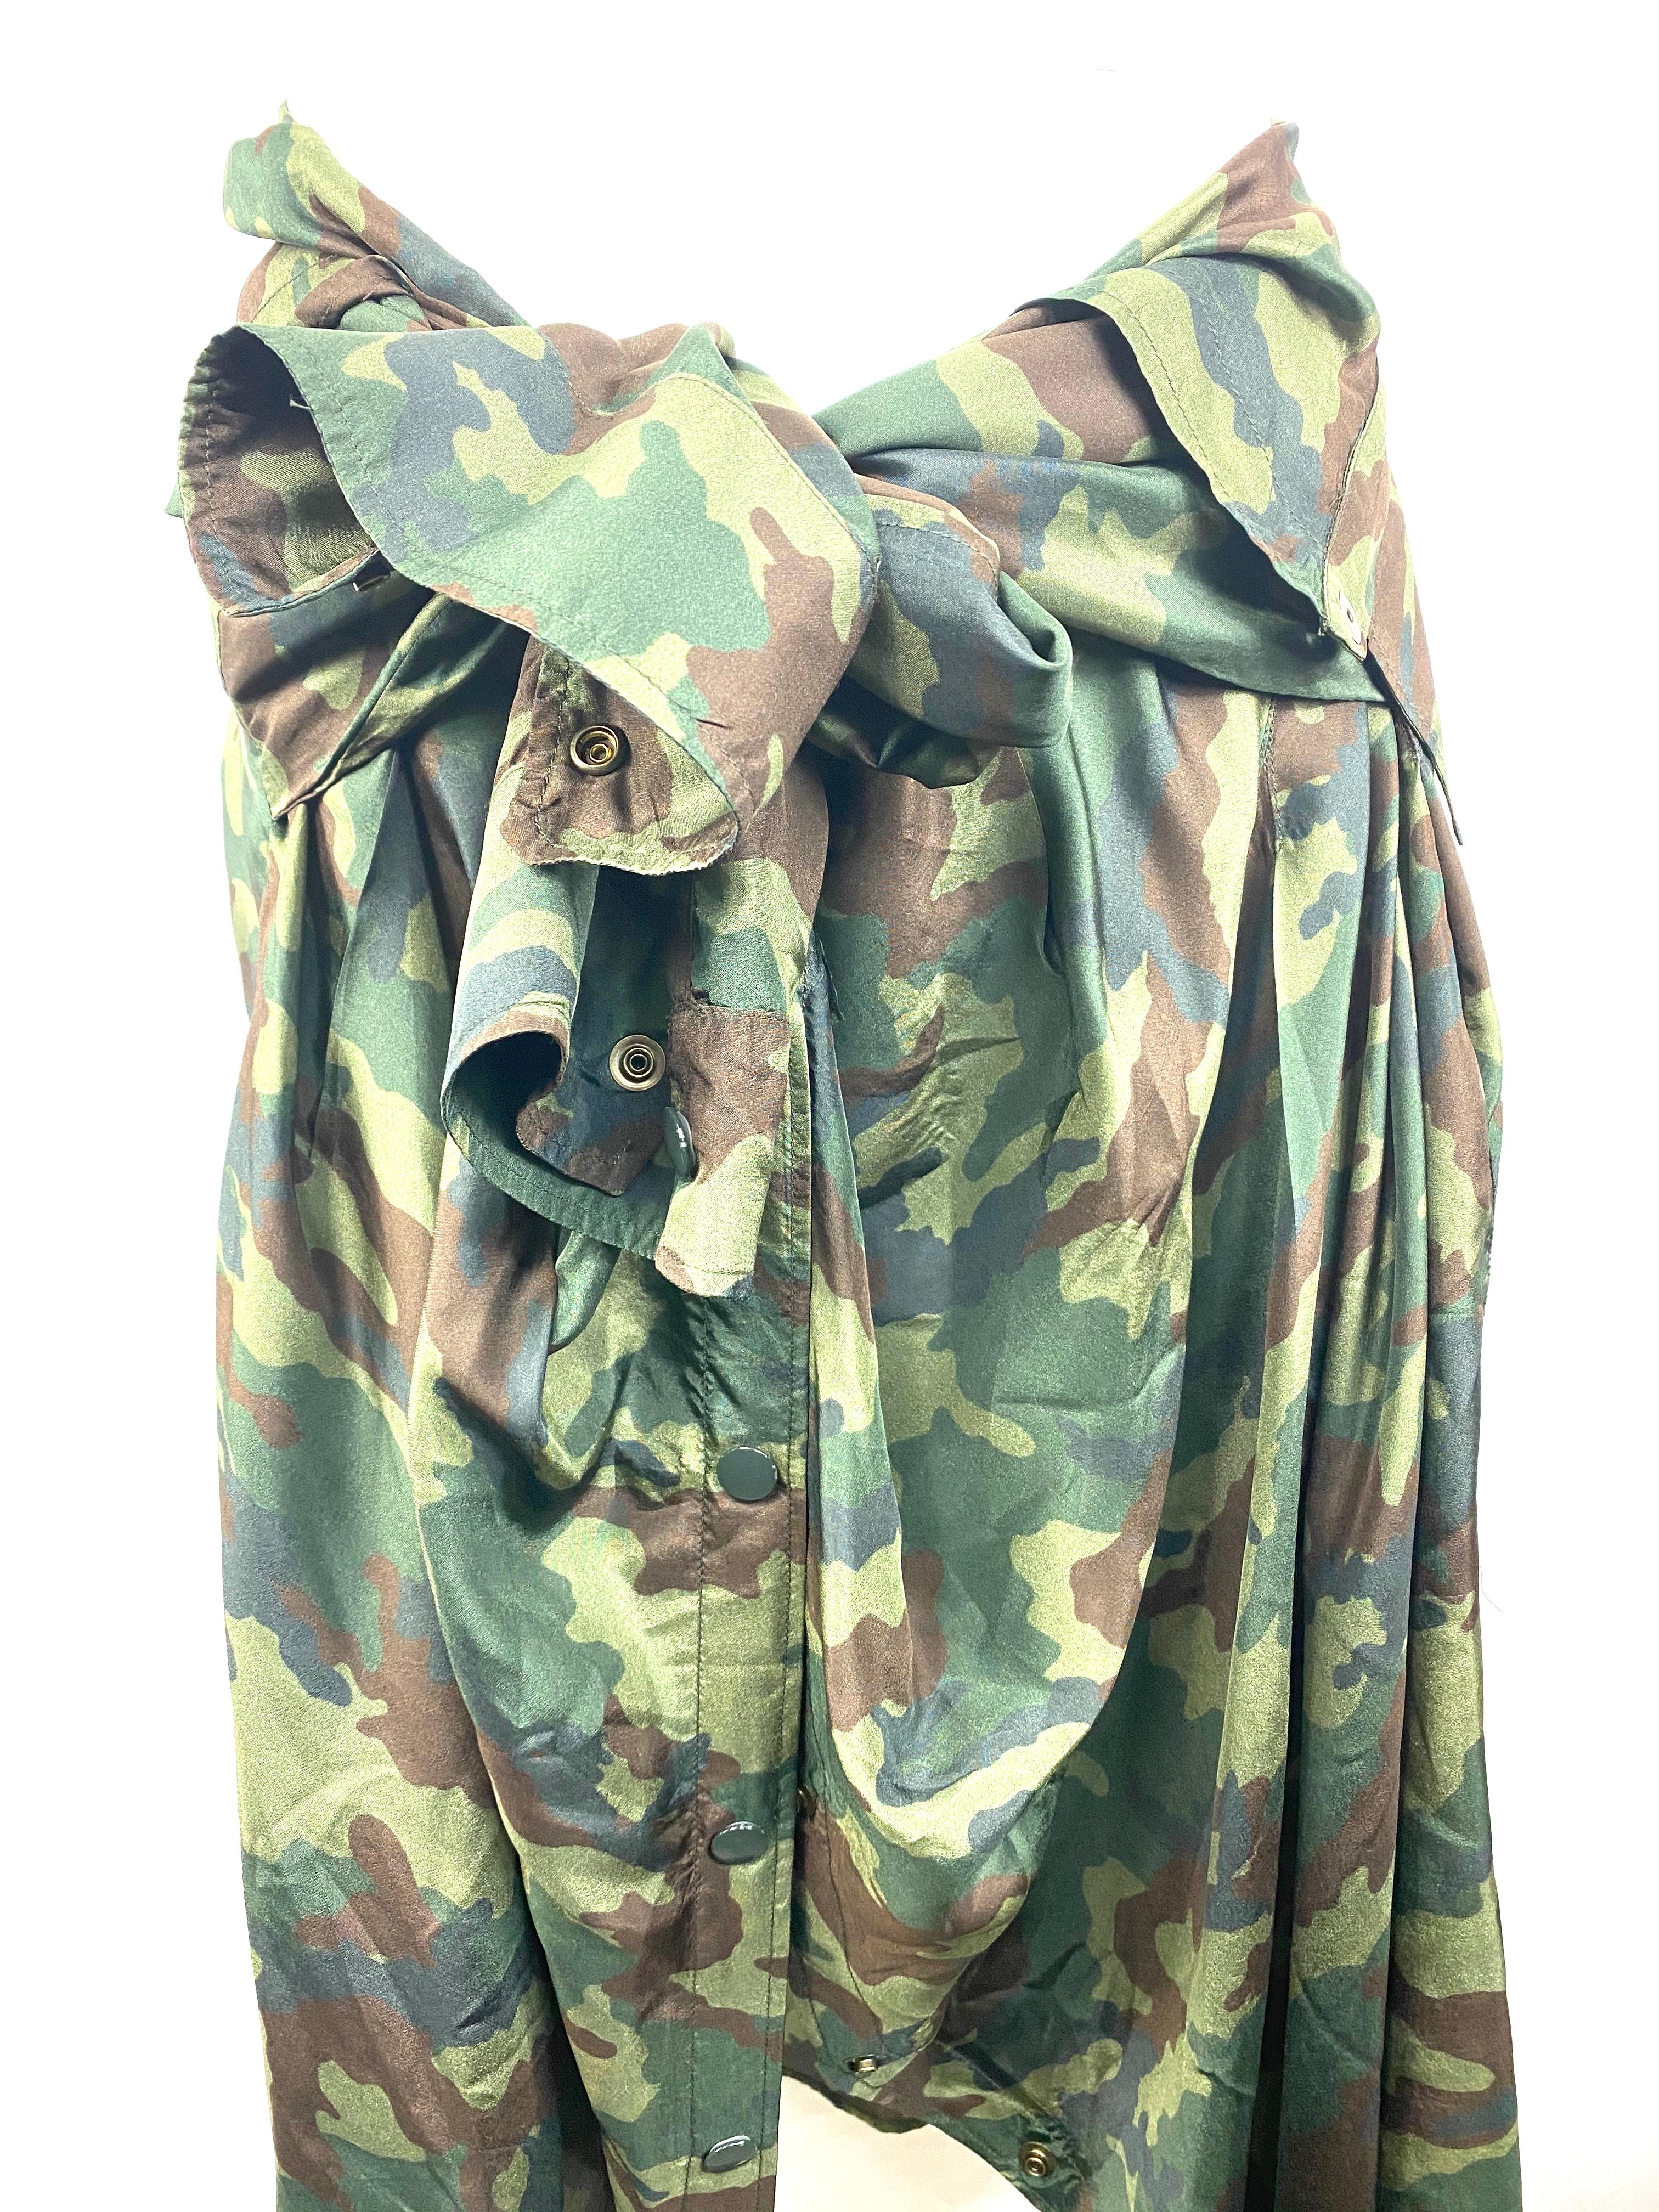 Product details:

Size Medium.
Featuring 100% silk, armi kiki, green camouflage print , button down shirt as a skirt design with imitated sleeves tie at the waist and front button down closure, mid length.
Made in Morocco.
